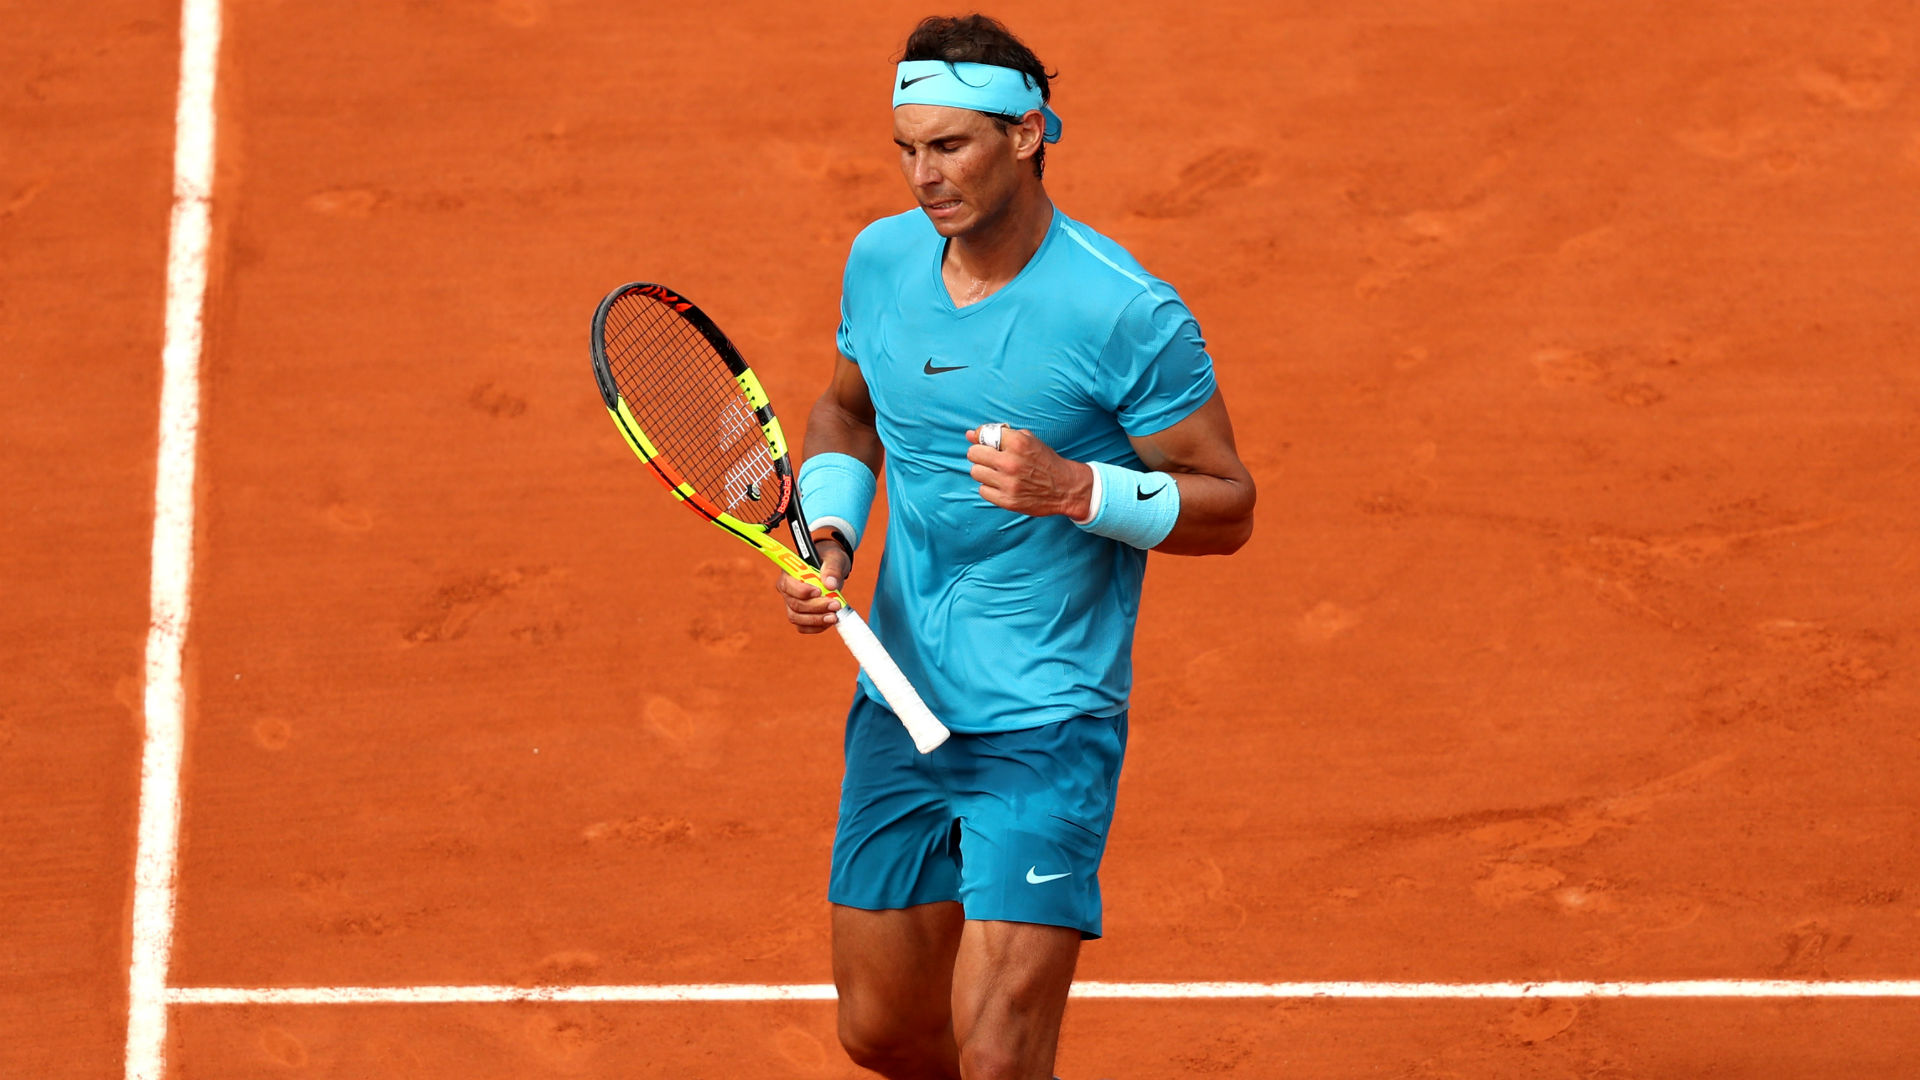 A look at Rafael Nadal's French Open dominance | Sporting News